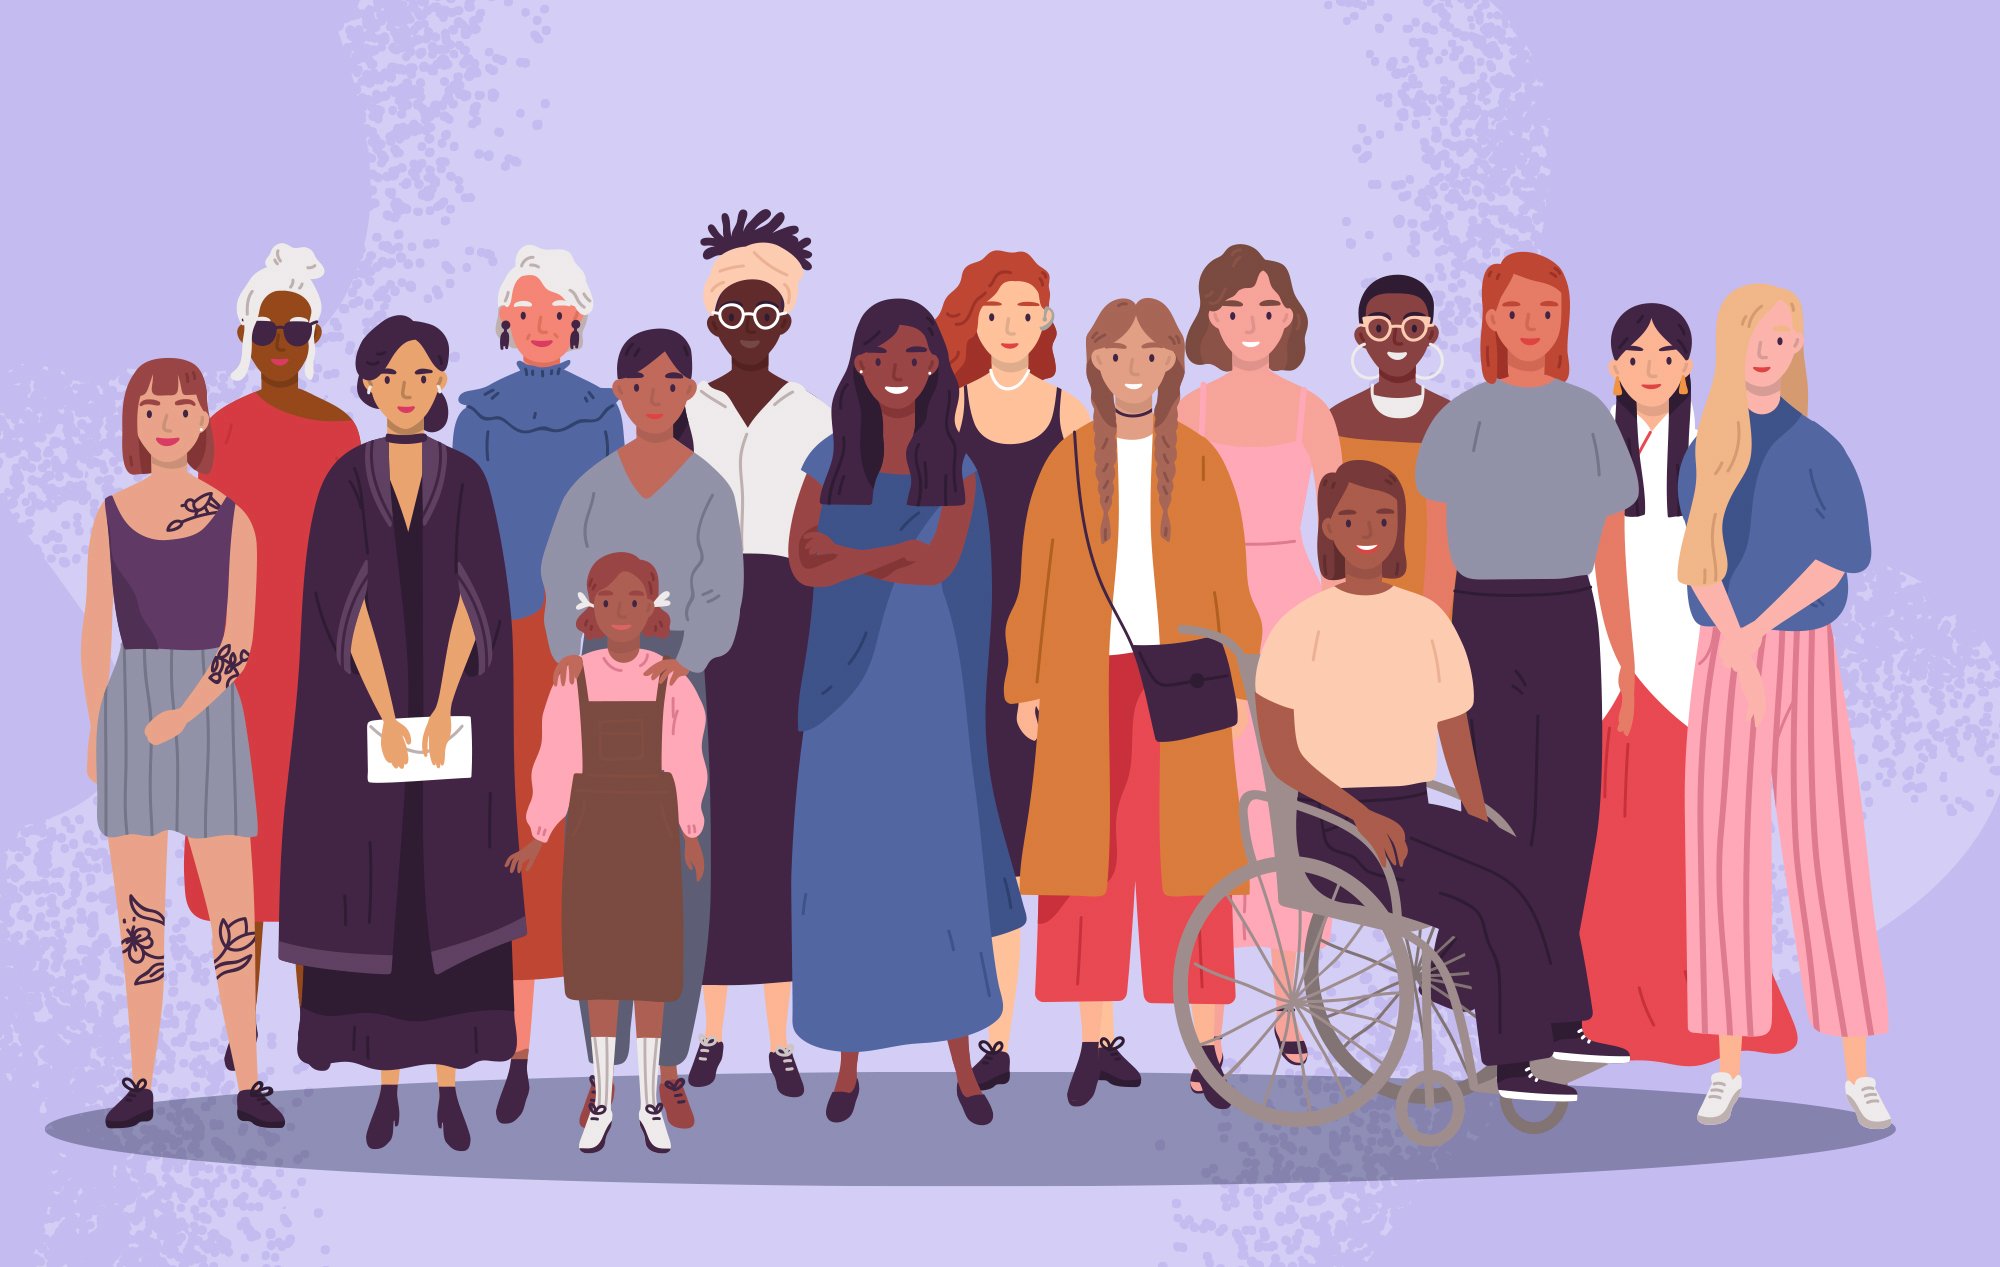 Illustration of a diverse group of women in a group together, smiling.